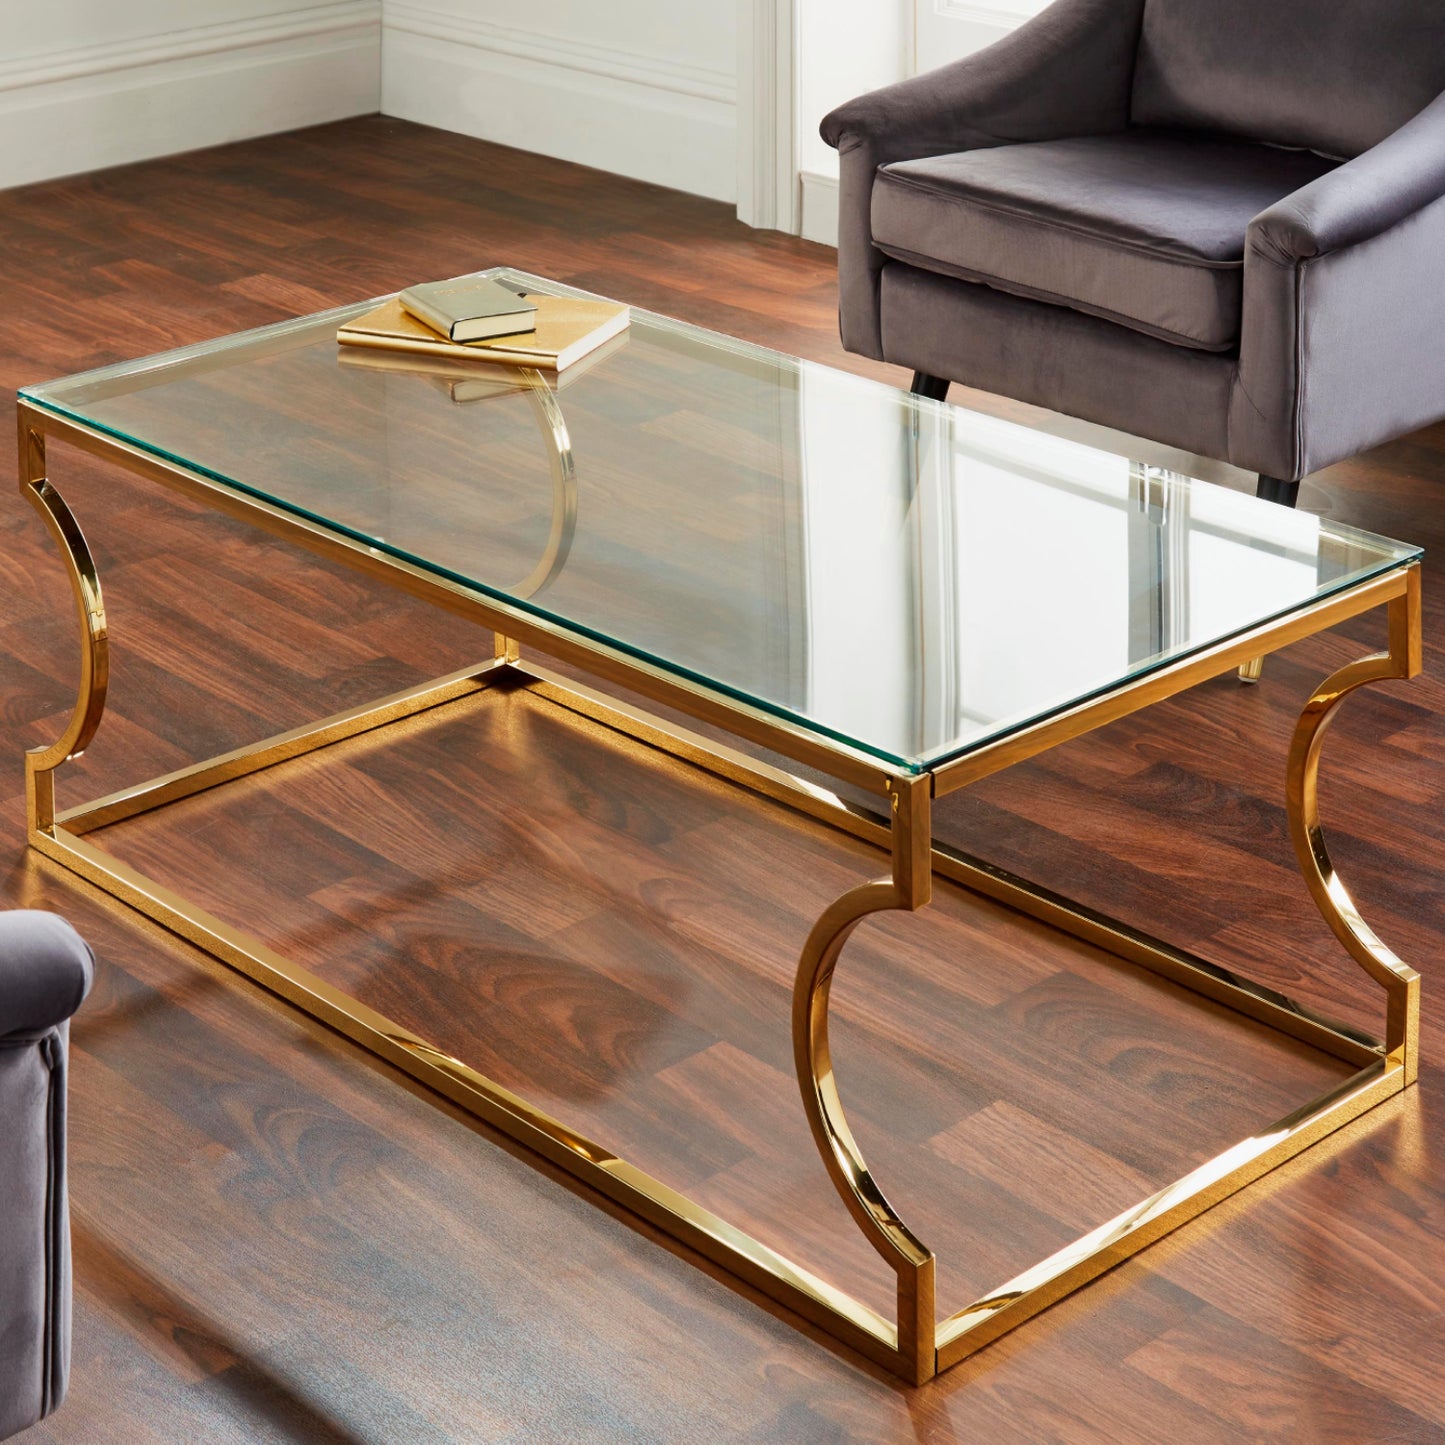 Rome gold coffee table by Native